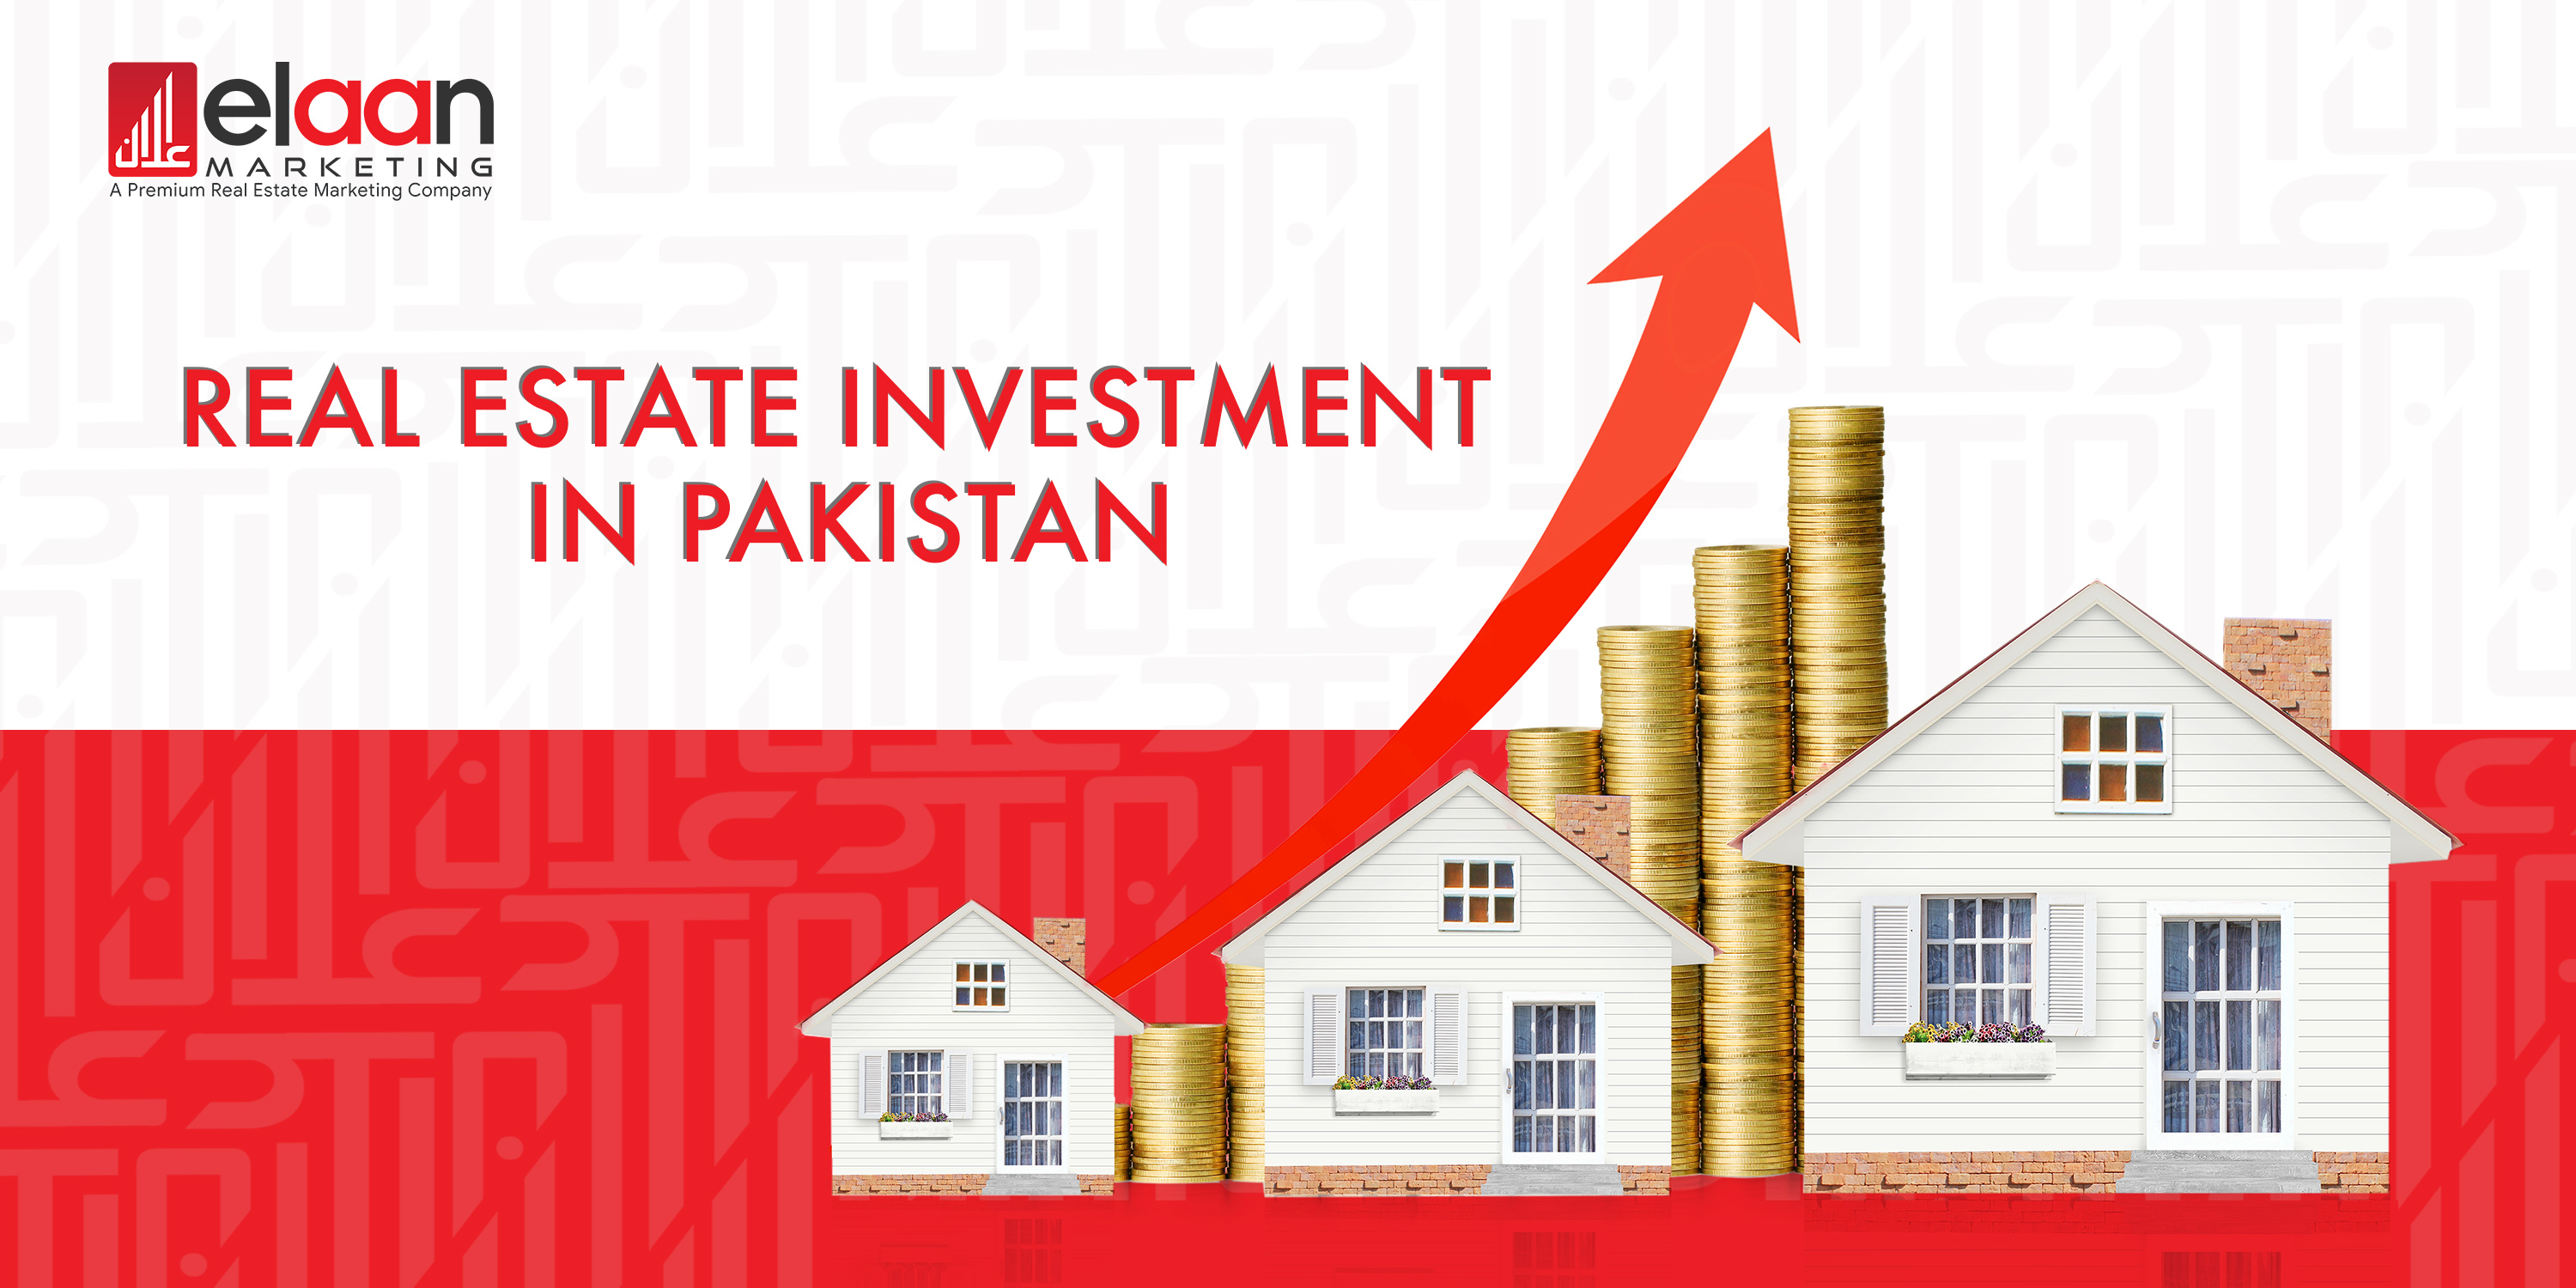 Real estate investment in Pakistan